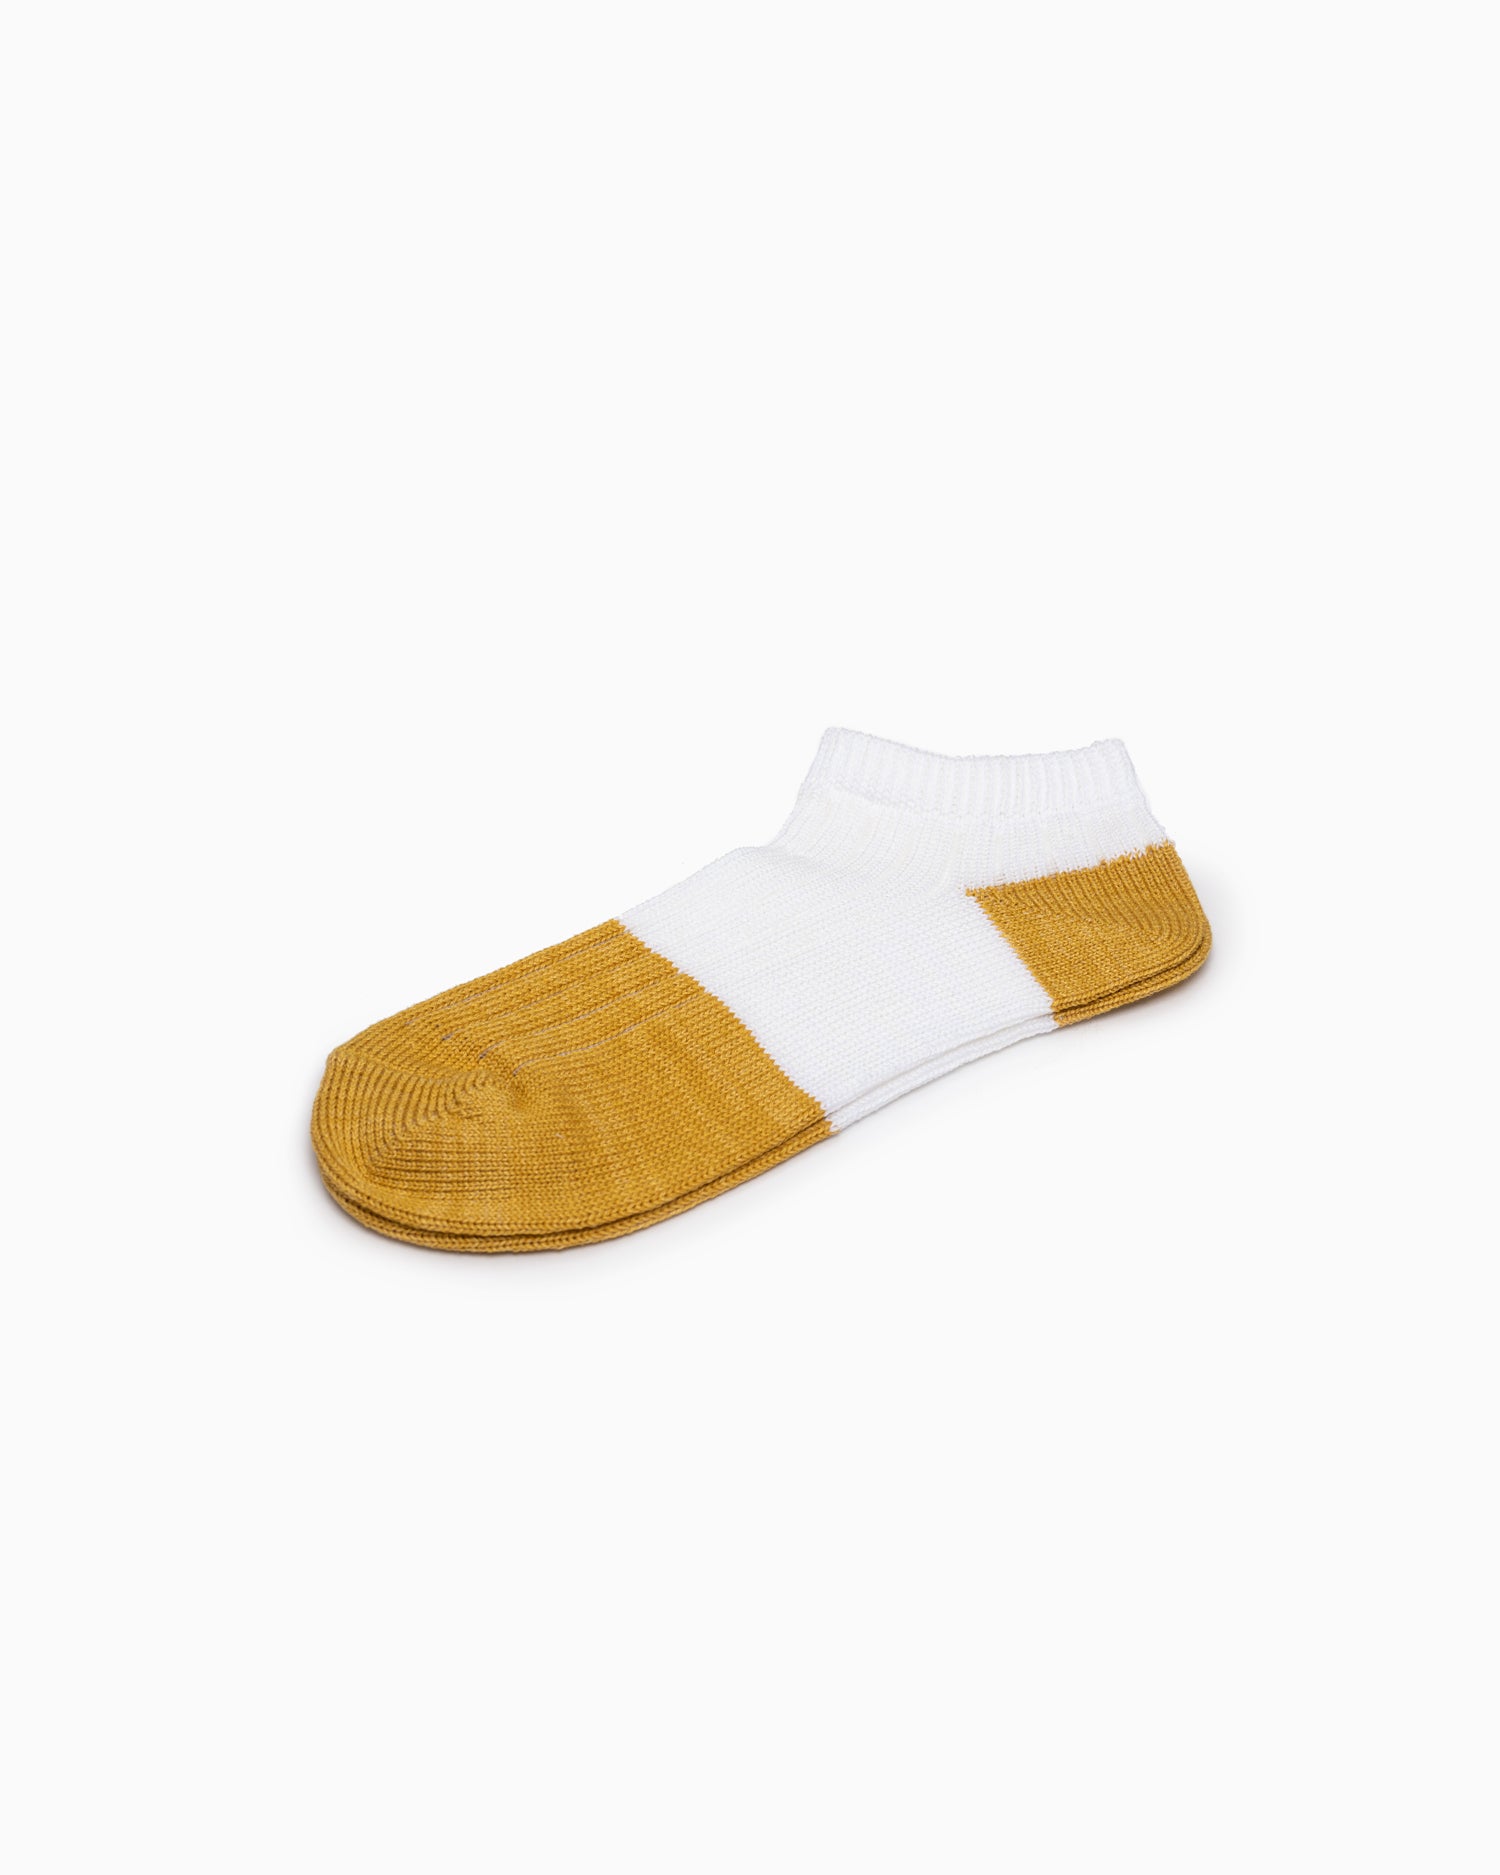 Linen Cotton Anklet - Tram Yellow